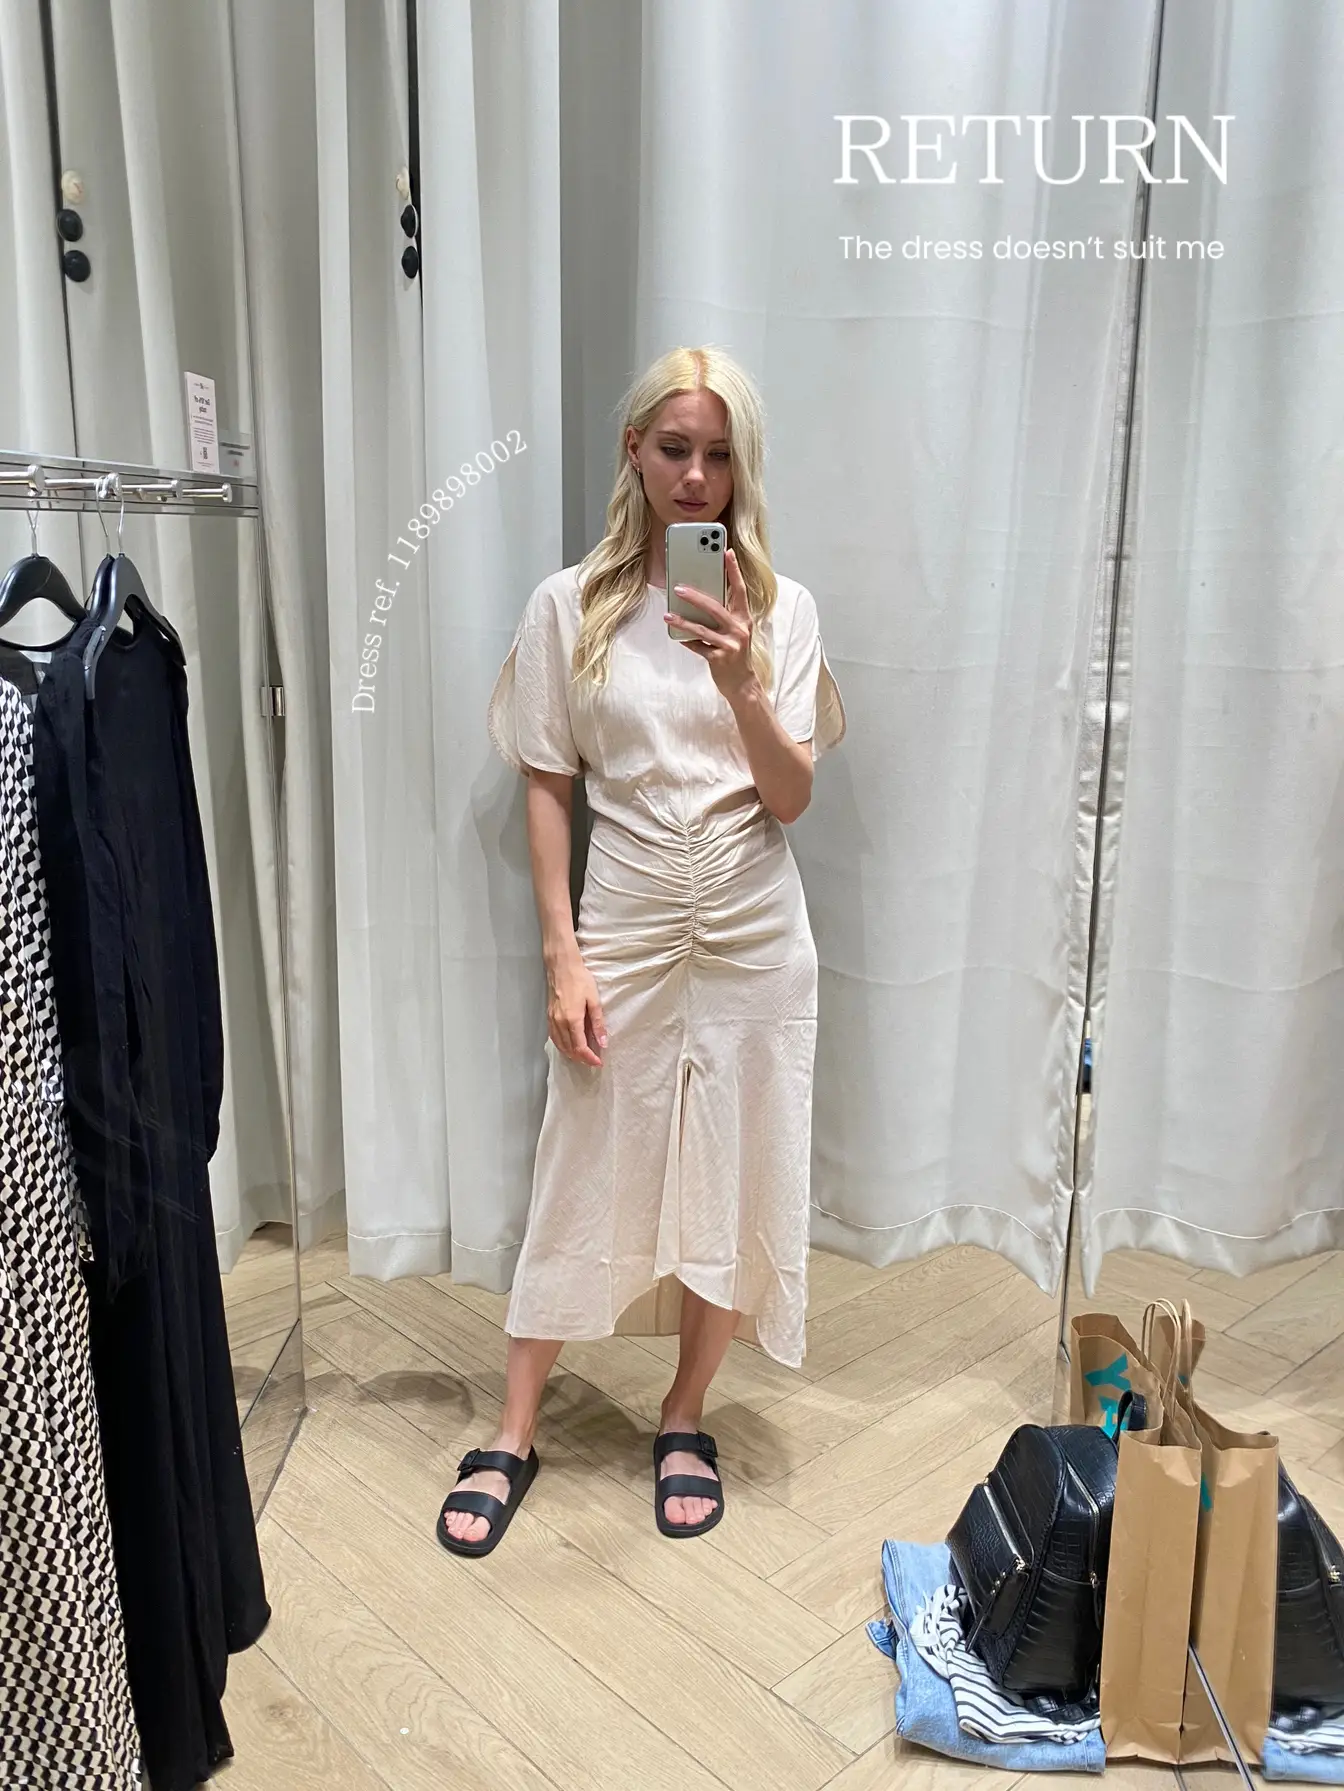 H&M Summer Try On: Keep or Return?, Gallery posted by Evgeniia